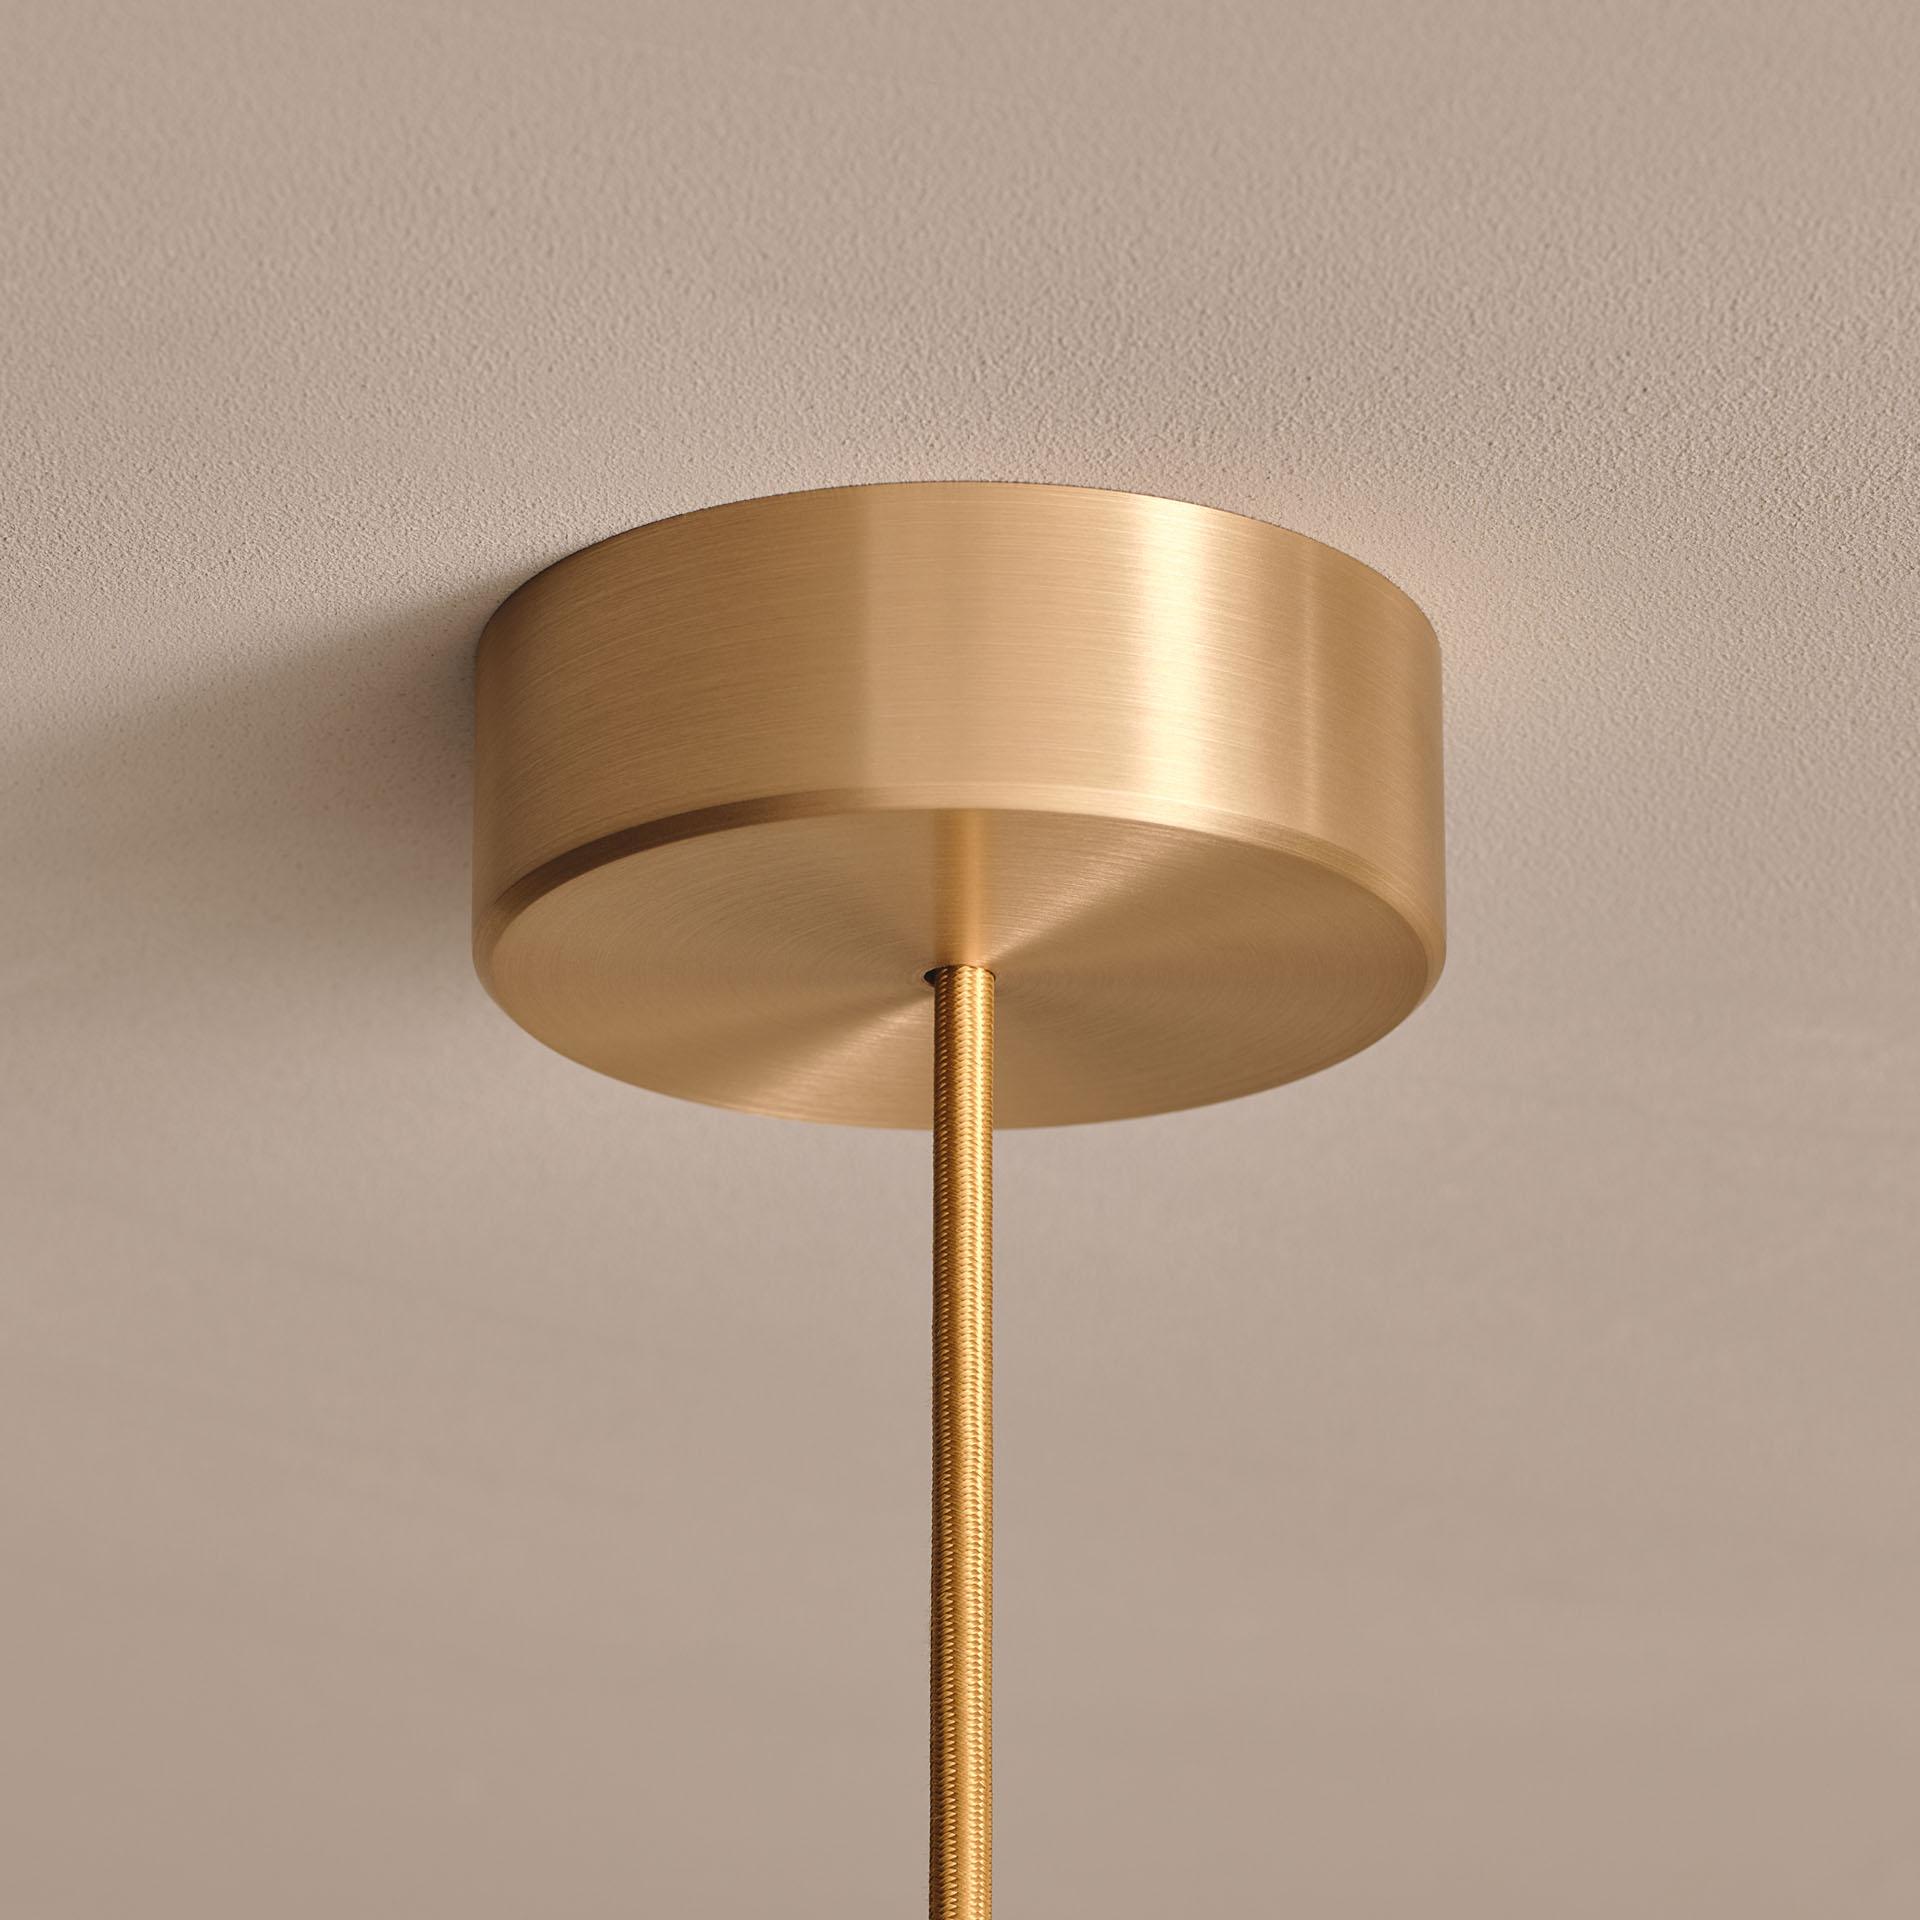 Contemporary 'Seleno Sol Pendant 70' Handmade Brushed Steel and Brass Ceiling Lamp For Sale